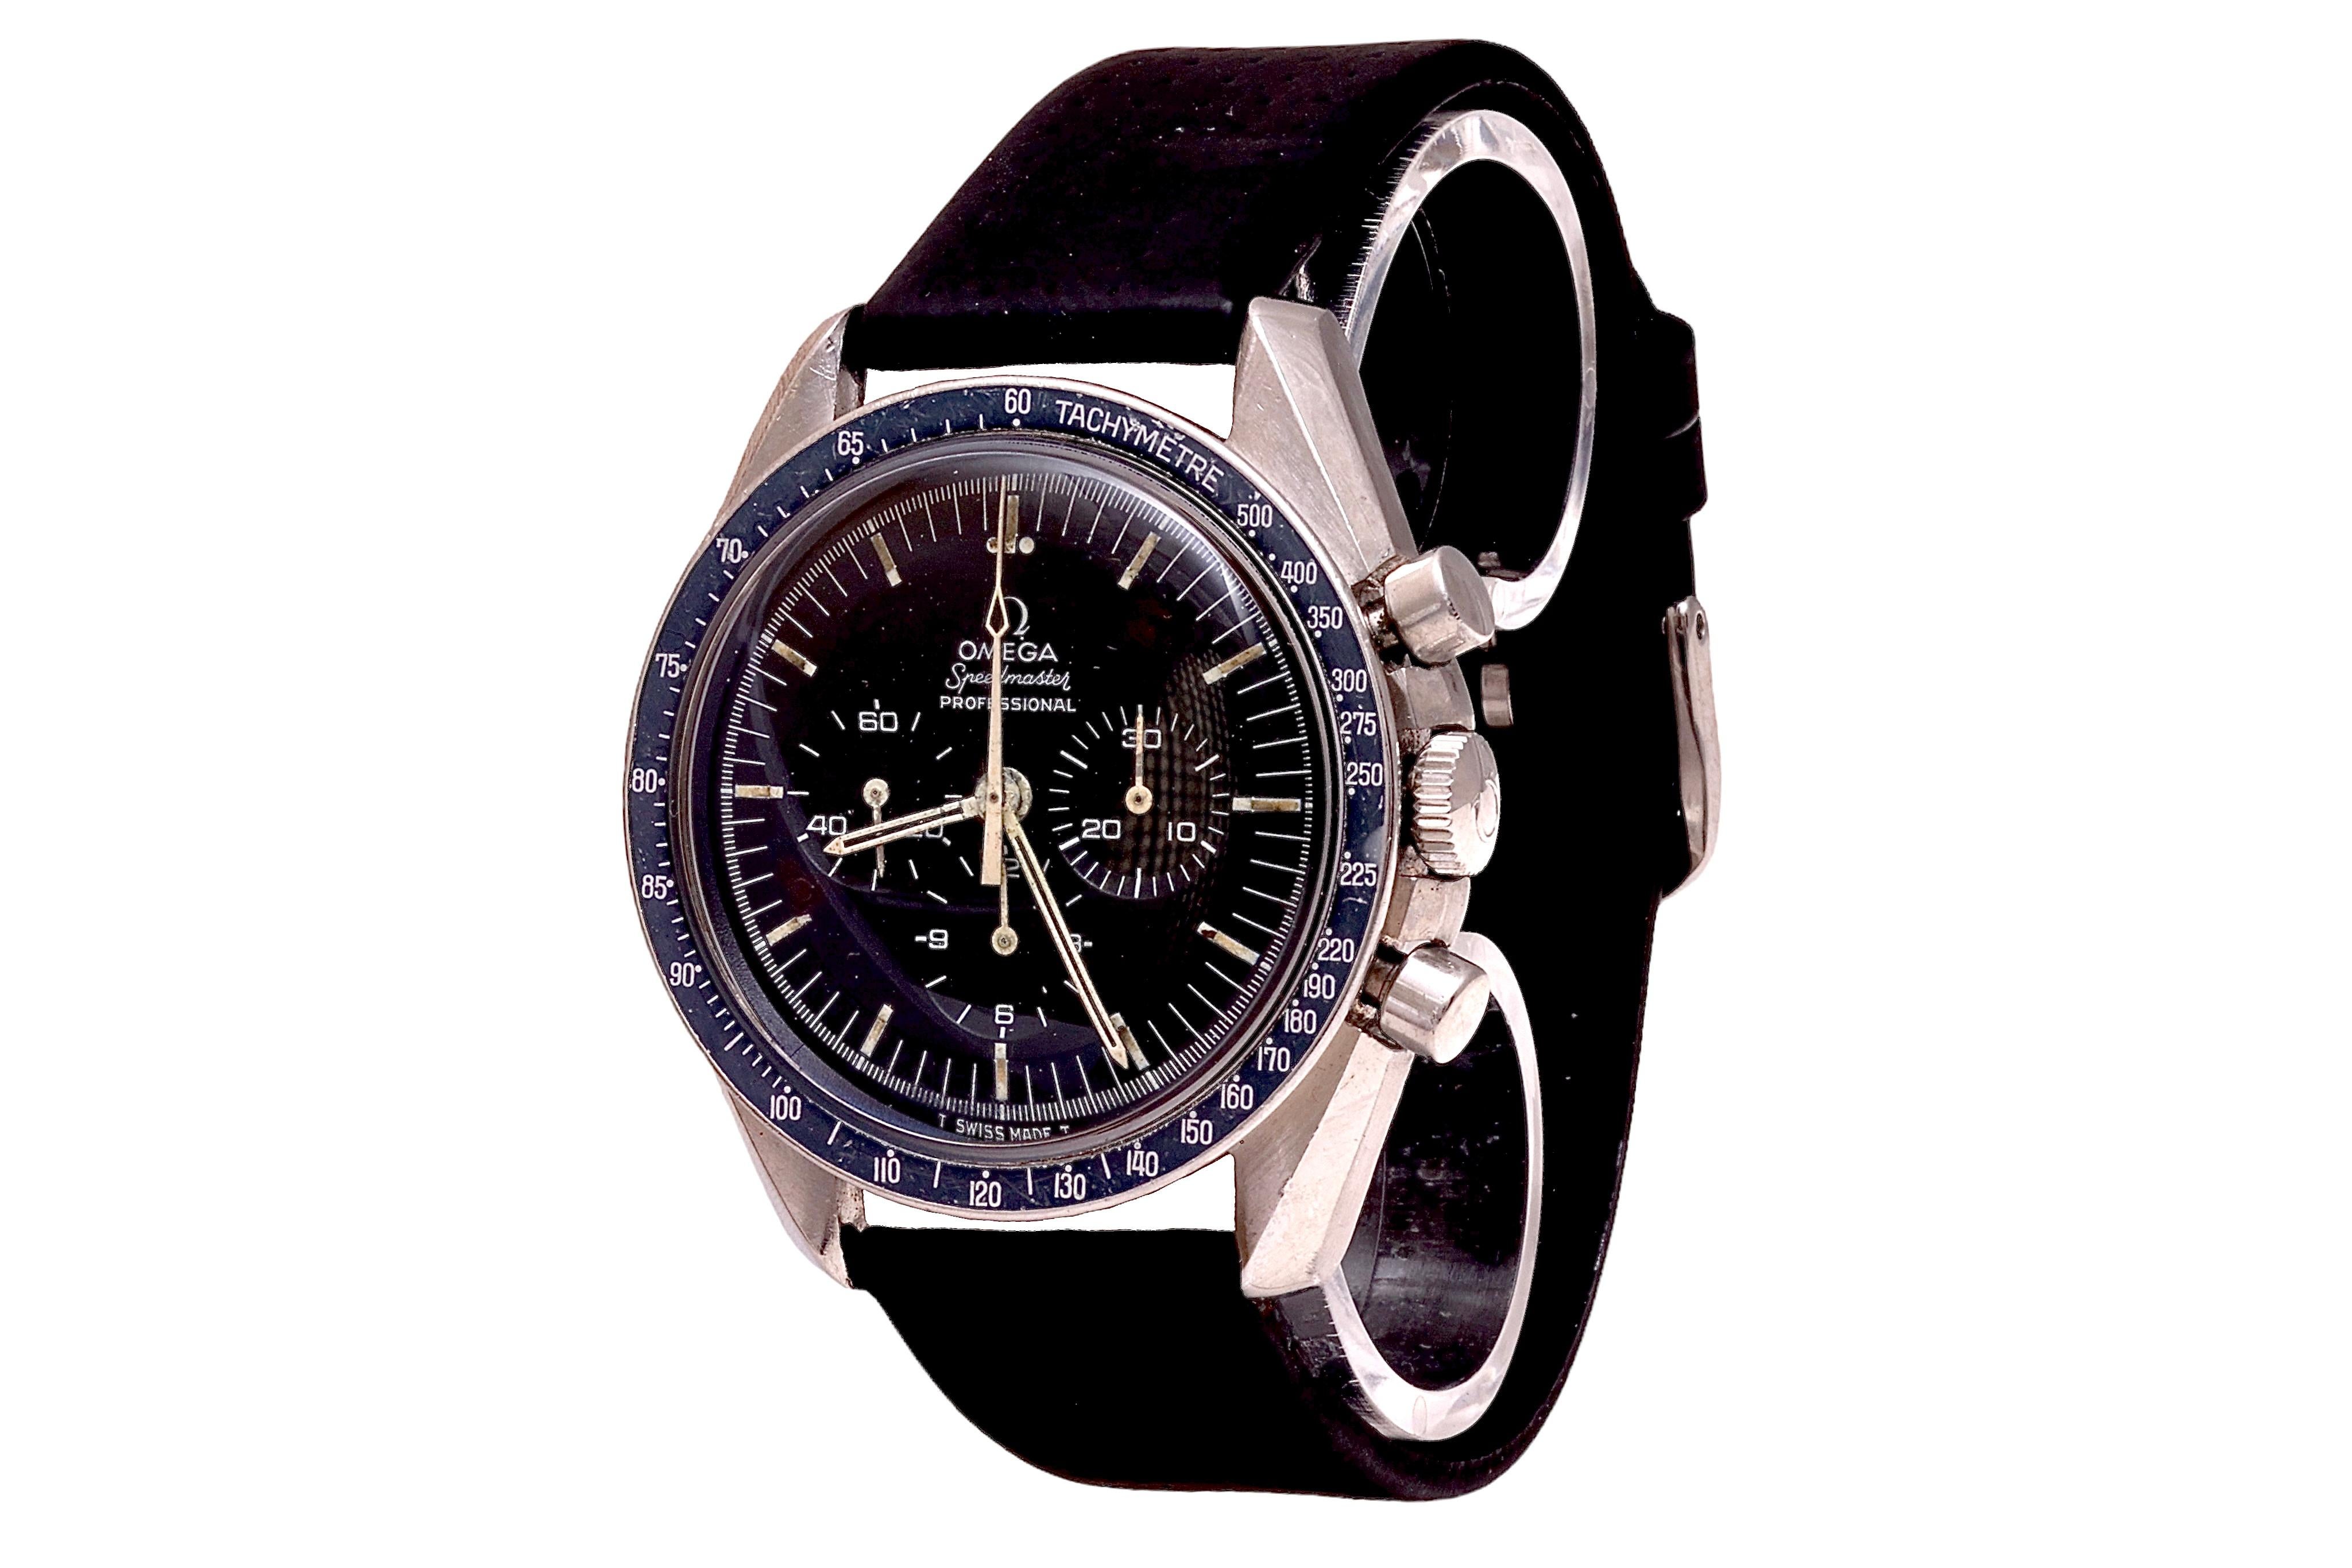 Steel Omega Speedmaster Vintage 1970 's Chronograph Wrist Watch Ref. ST145.022

With Omega Extract from The Archives